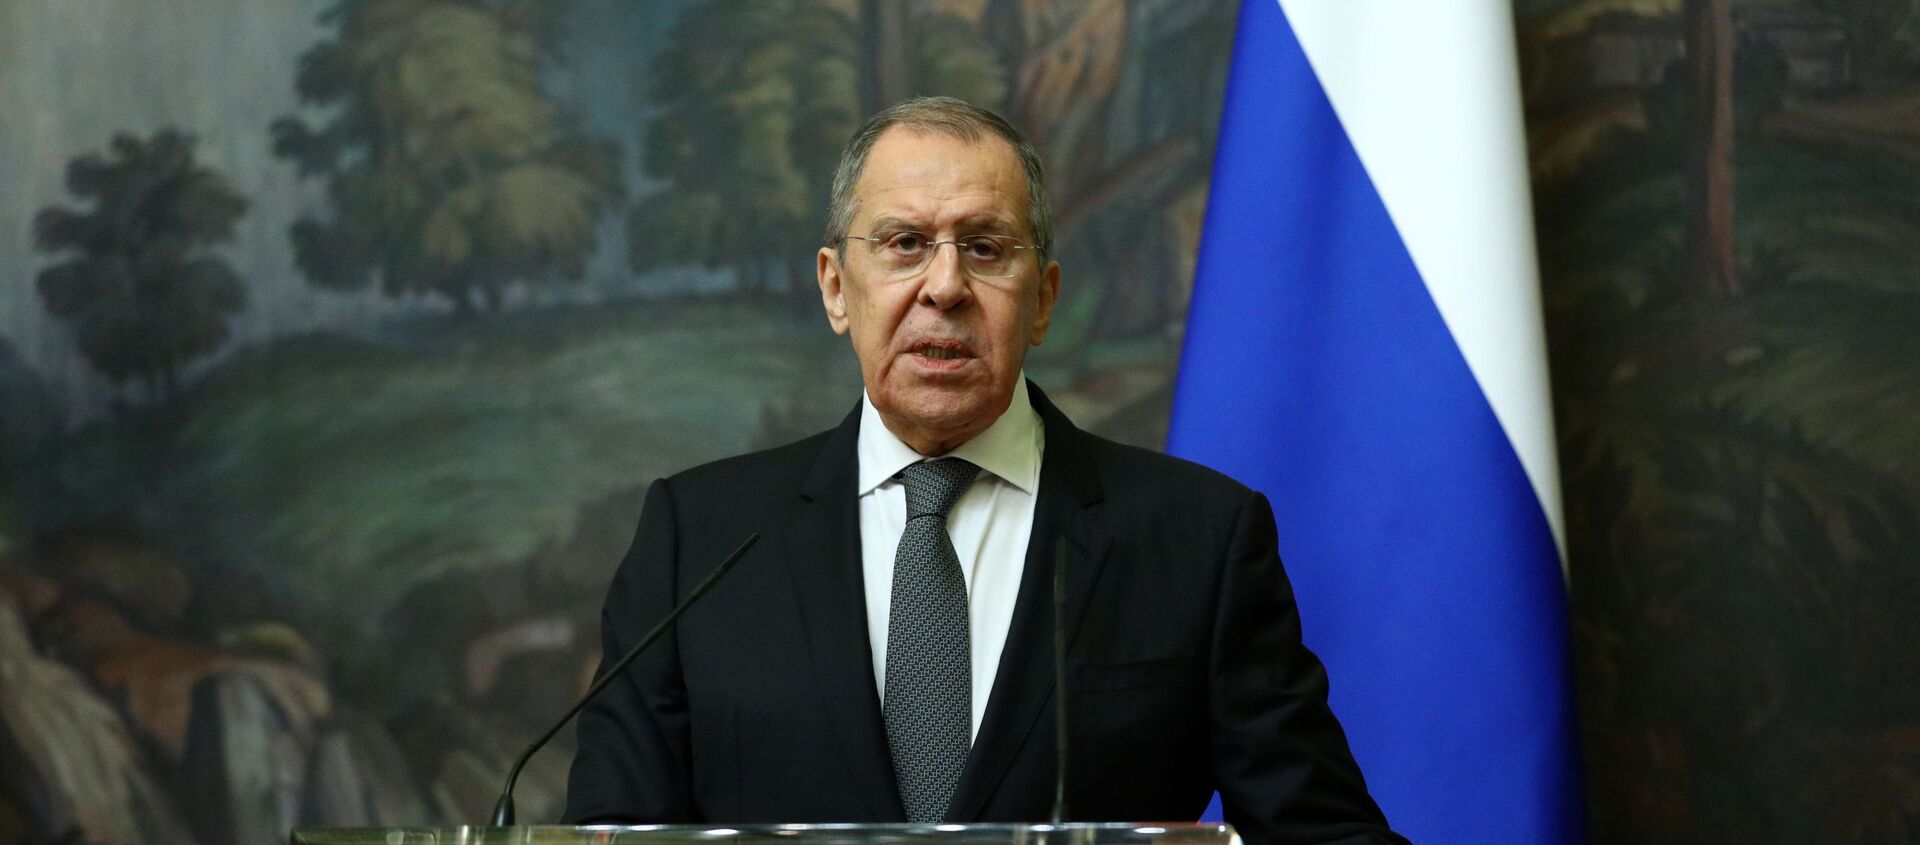 Russia's Foreign Minister Sergei Lavrov attends a news conference following a meeting with European Union's foreign policy chief Josep Borrell in Moscow, Russia February 5, 2021. - Sputnik International, 1920